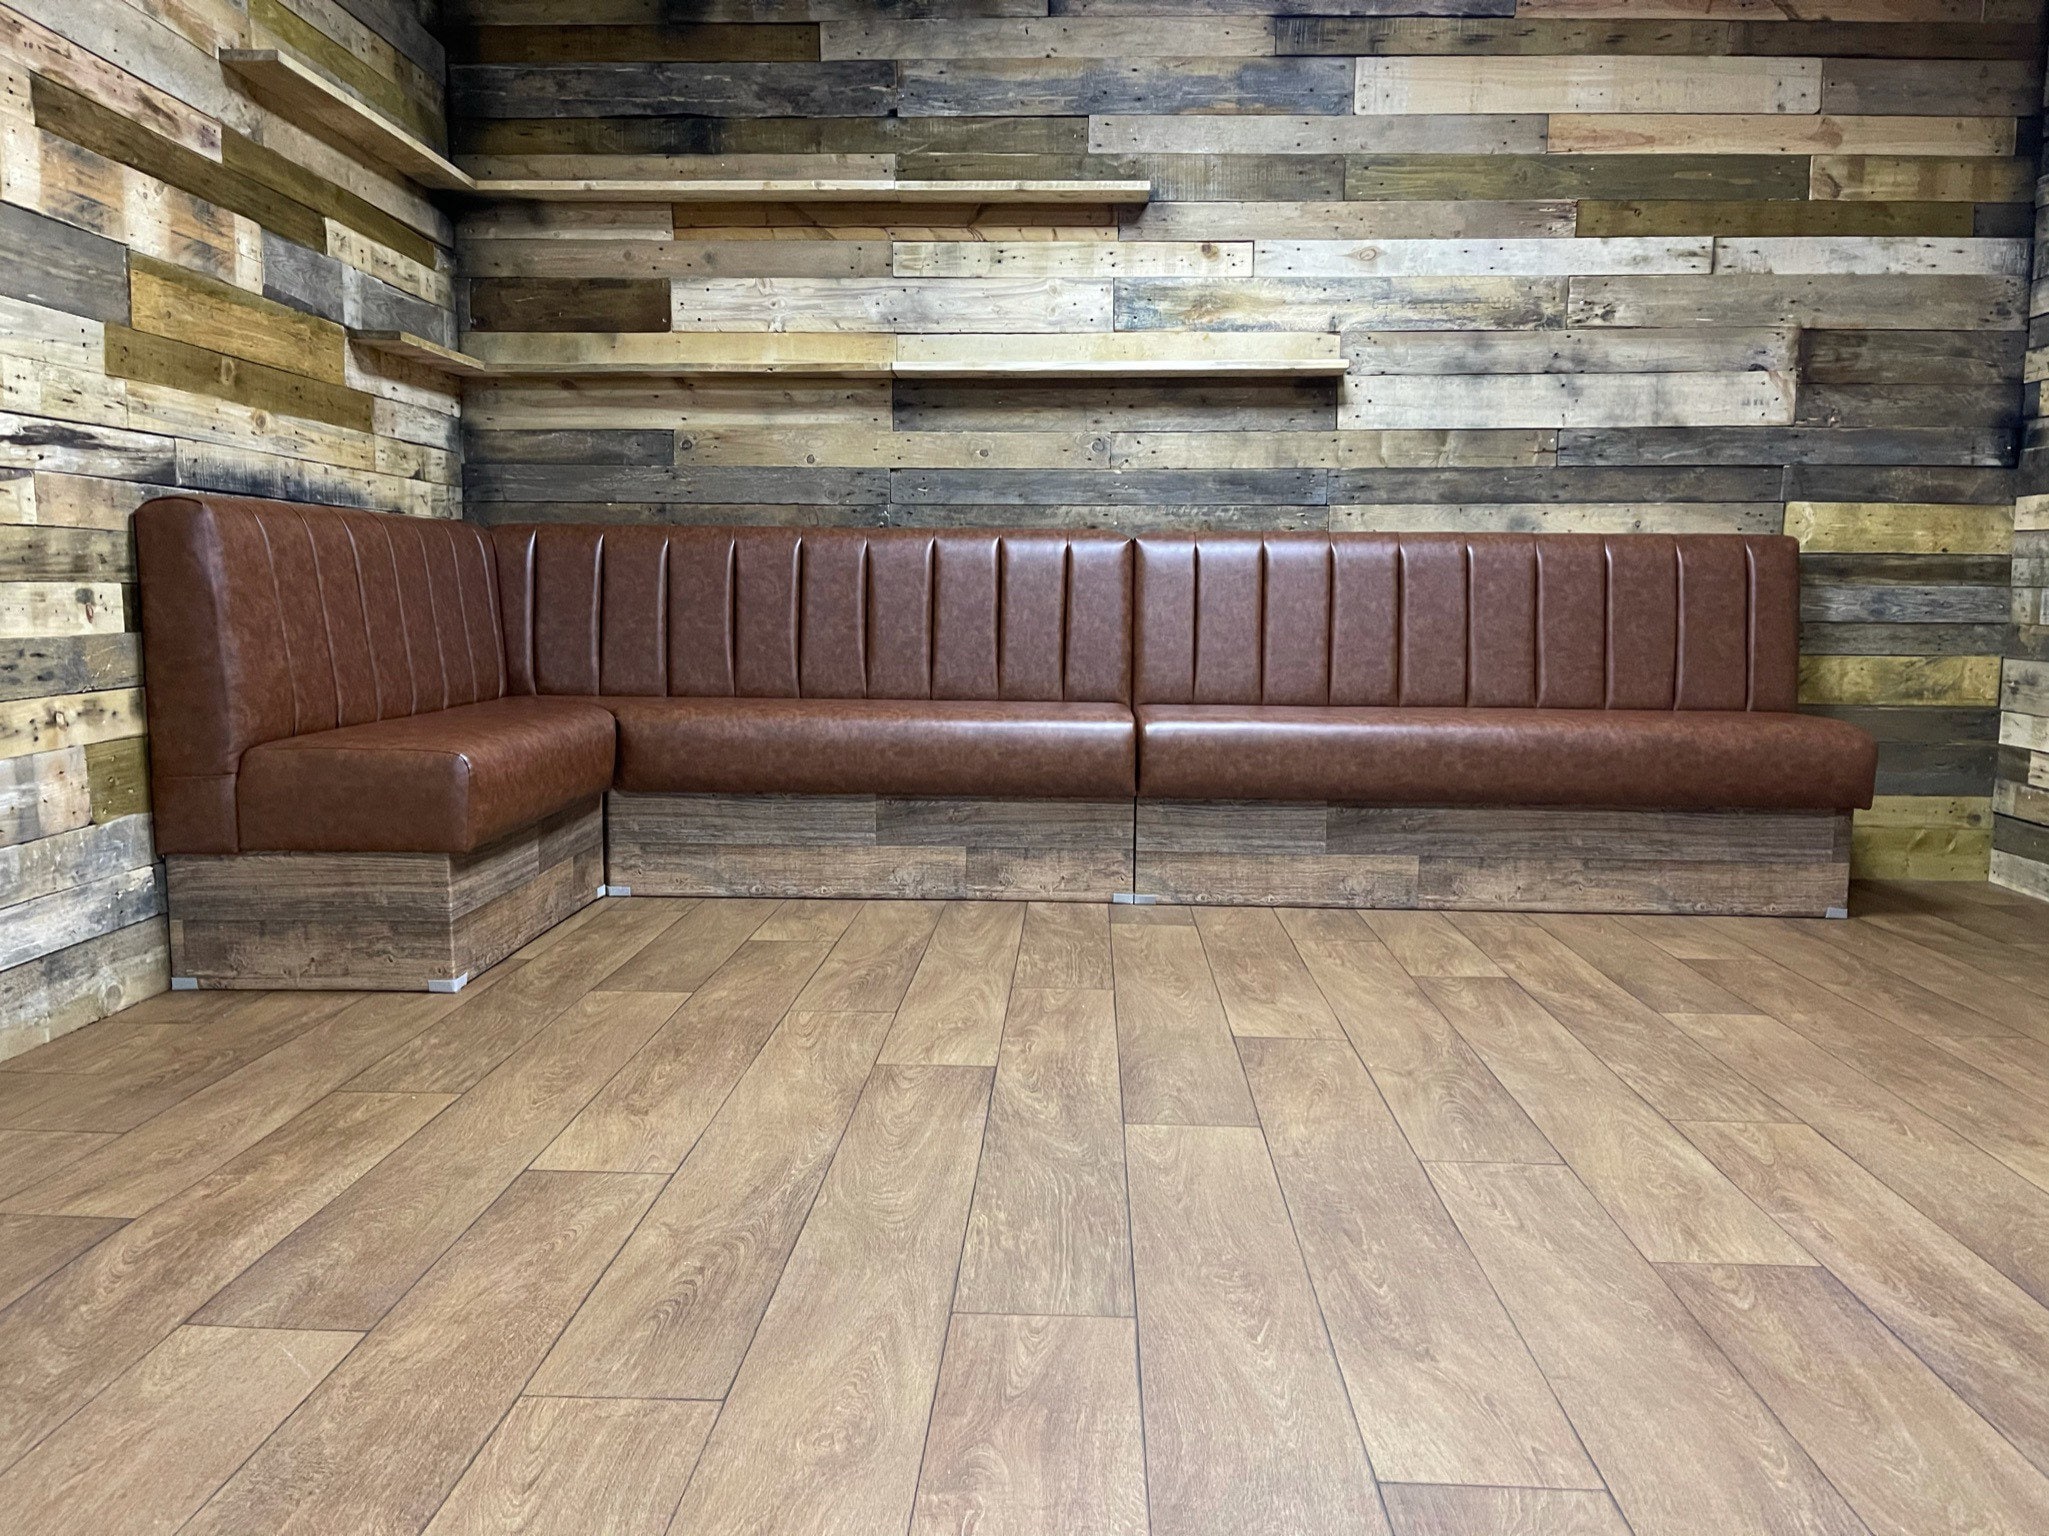 Faux Leather Fluted Corner Booth, Faux Leather Banquette Bench